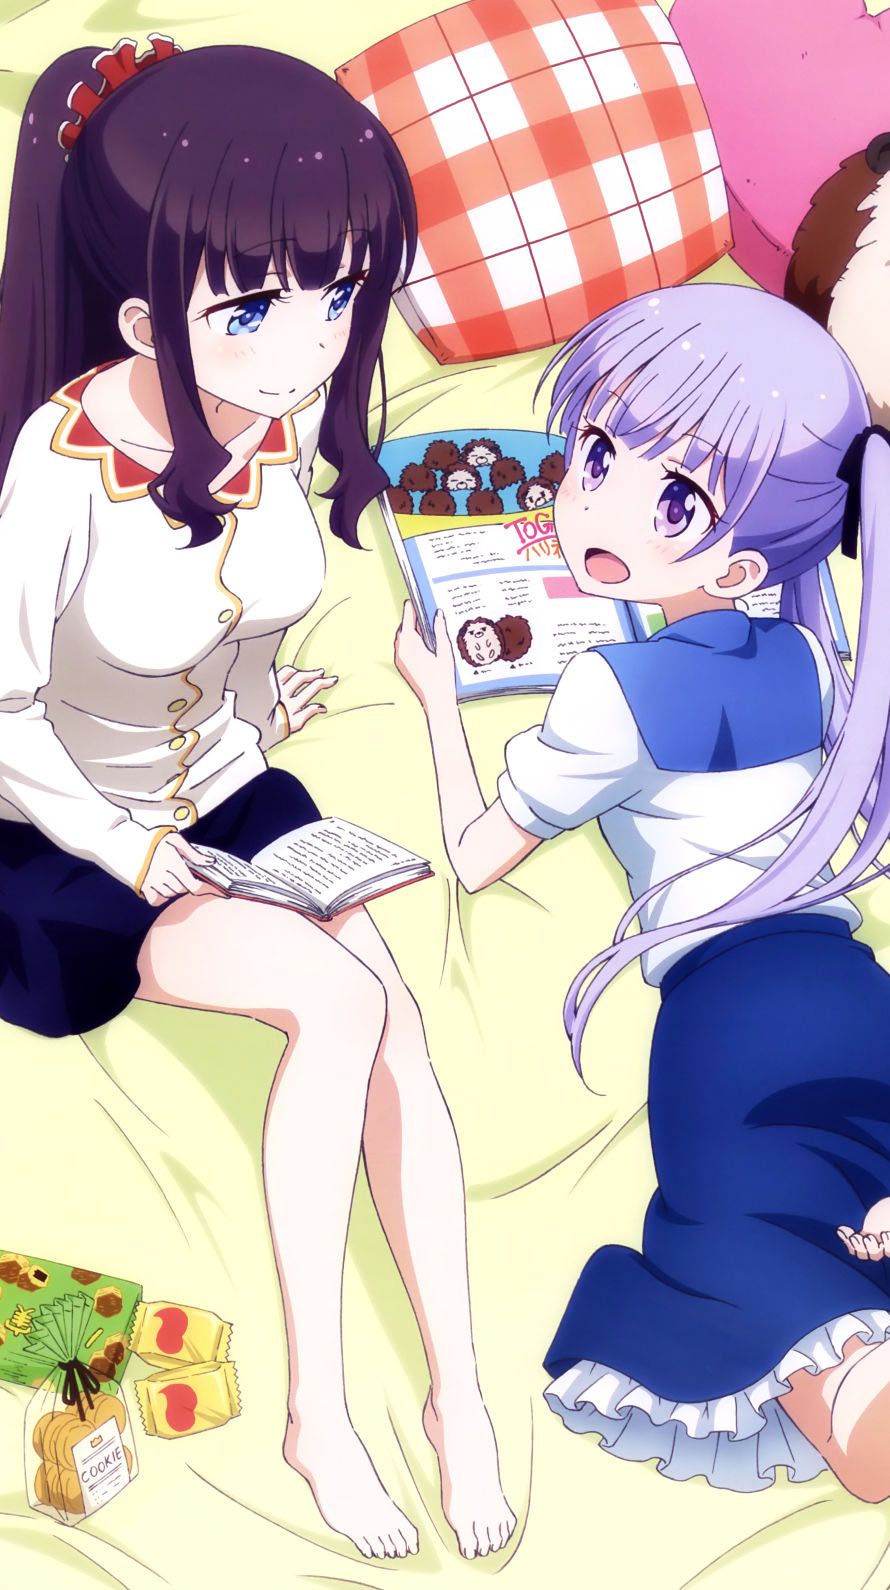 New Game ニューゲーム Iphone壁紙画像 Androidスマホ壁紙 12 Iphone6 Iphone5s アニメ壁紙ネット Pc Android Iphone壁紙 画像